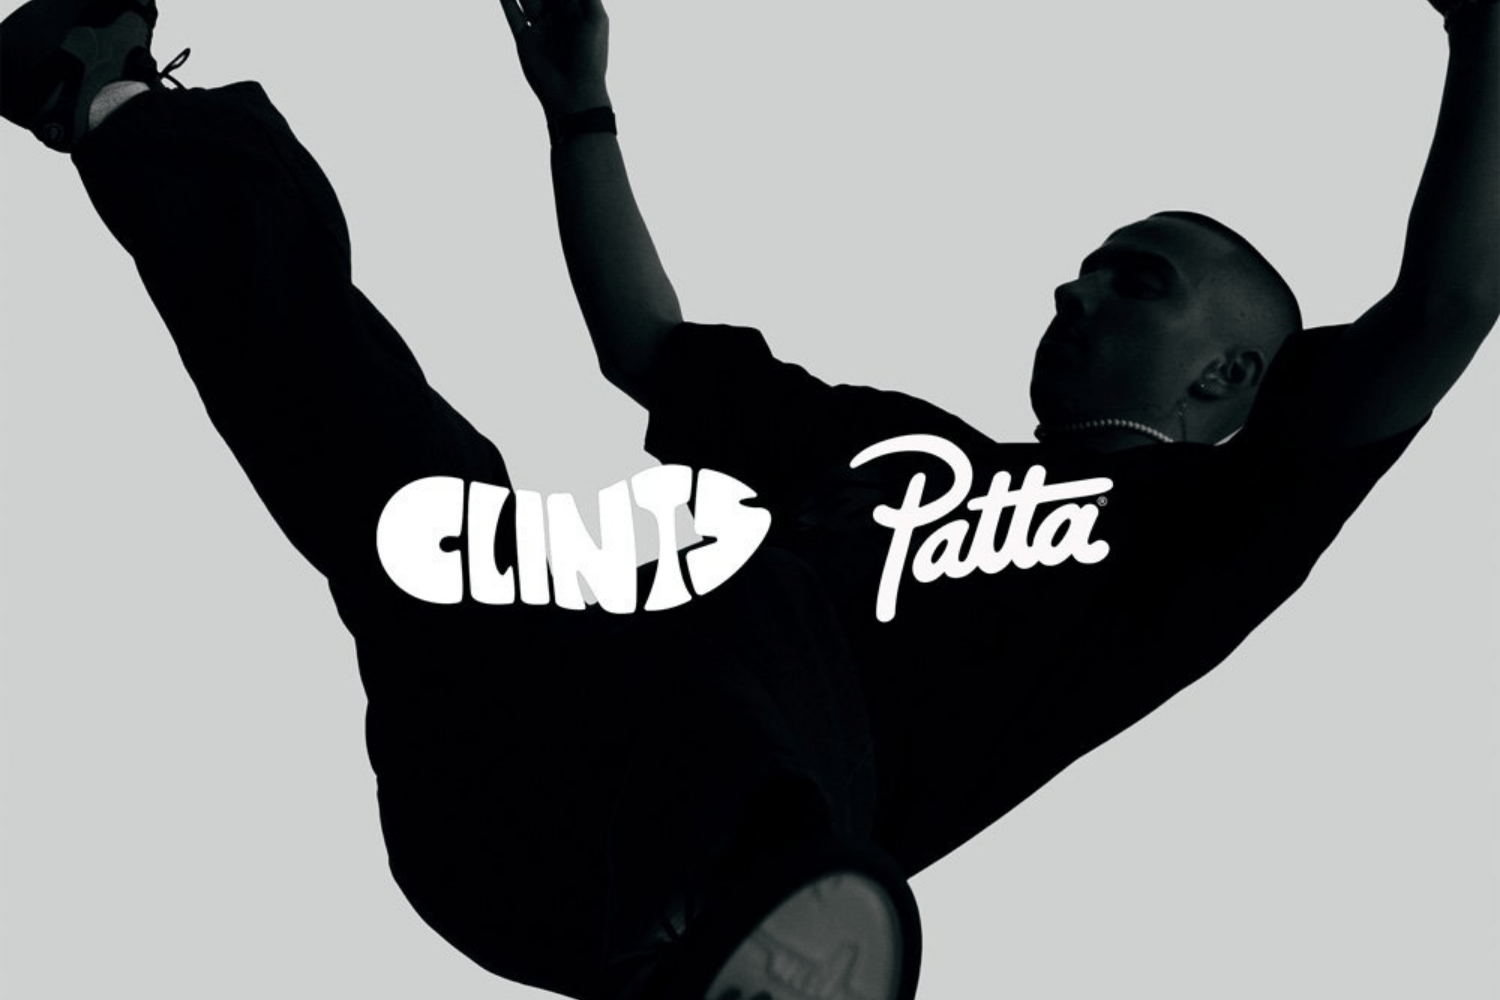 The Patta x Clints Stepper will release soon